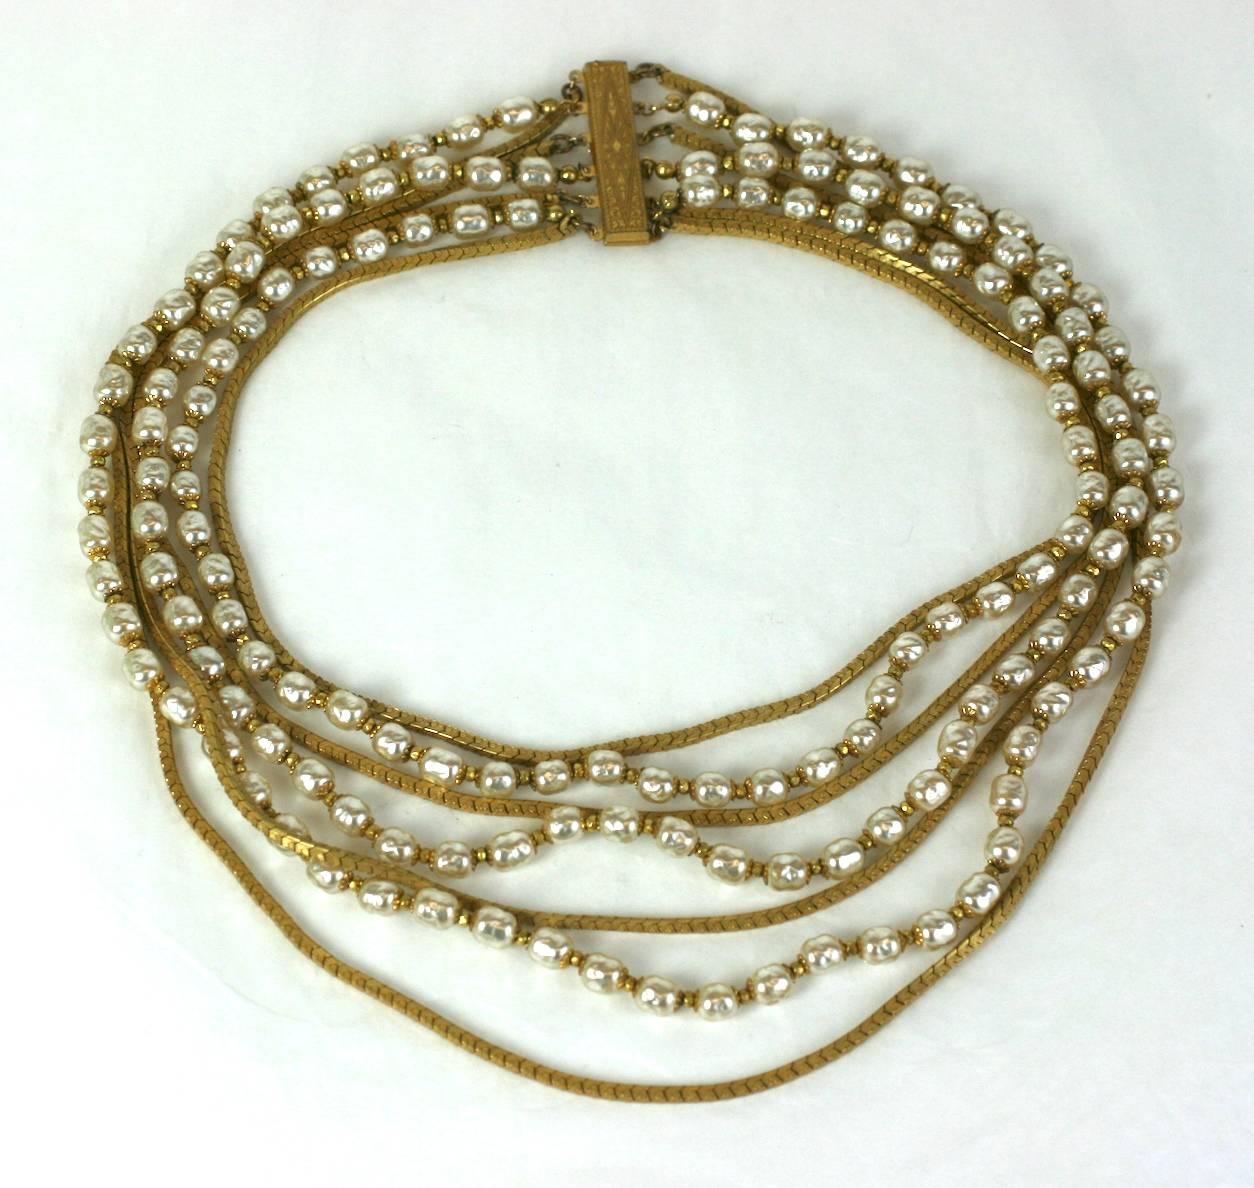 Elegant Miriam Haskell classic baroque faux pearl and signature Russian Gilt link chain seven strand necklace. 
1960's USA. Excellent Condition
Length interior 15.5